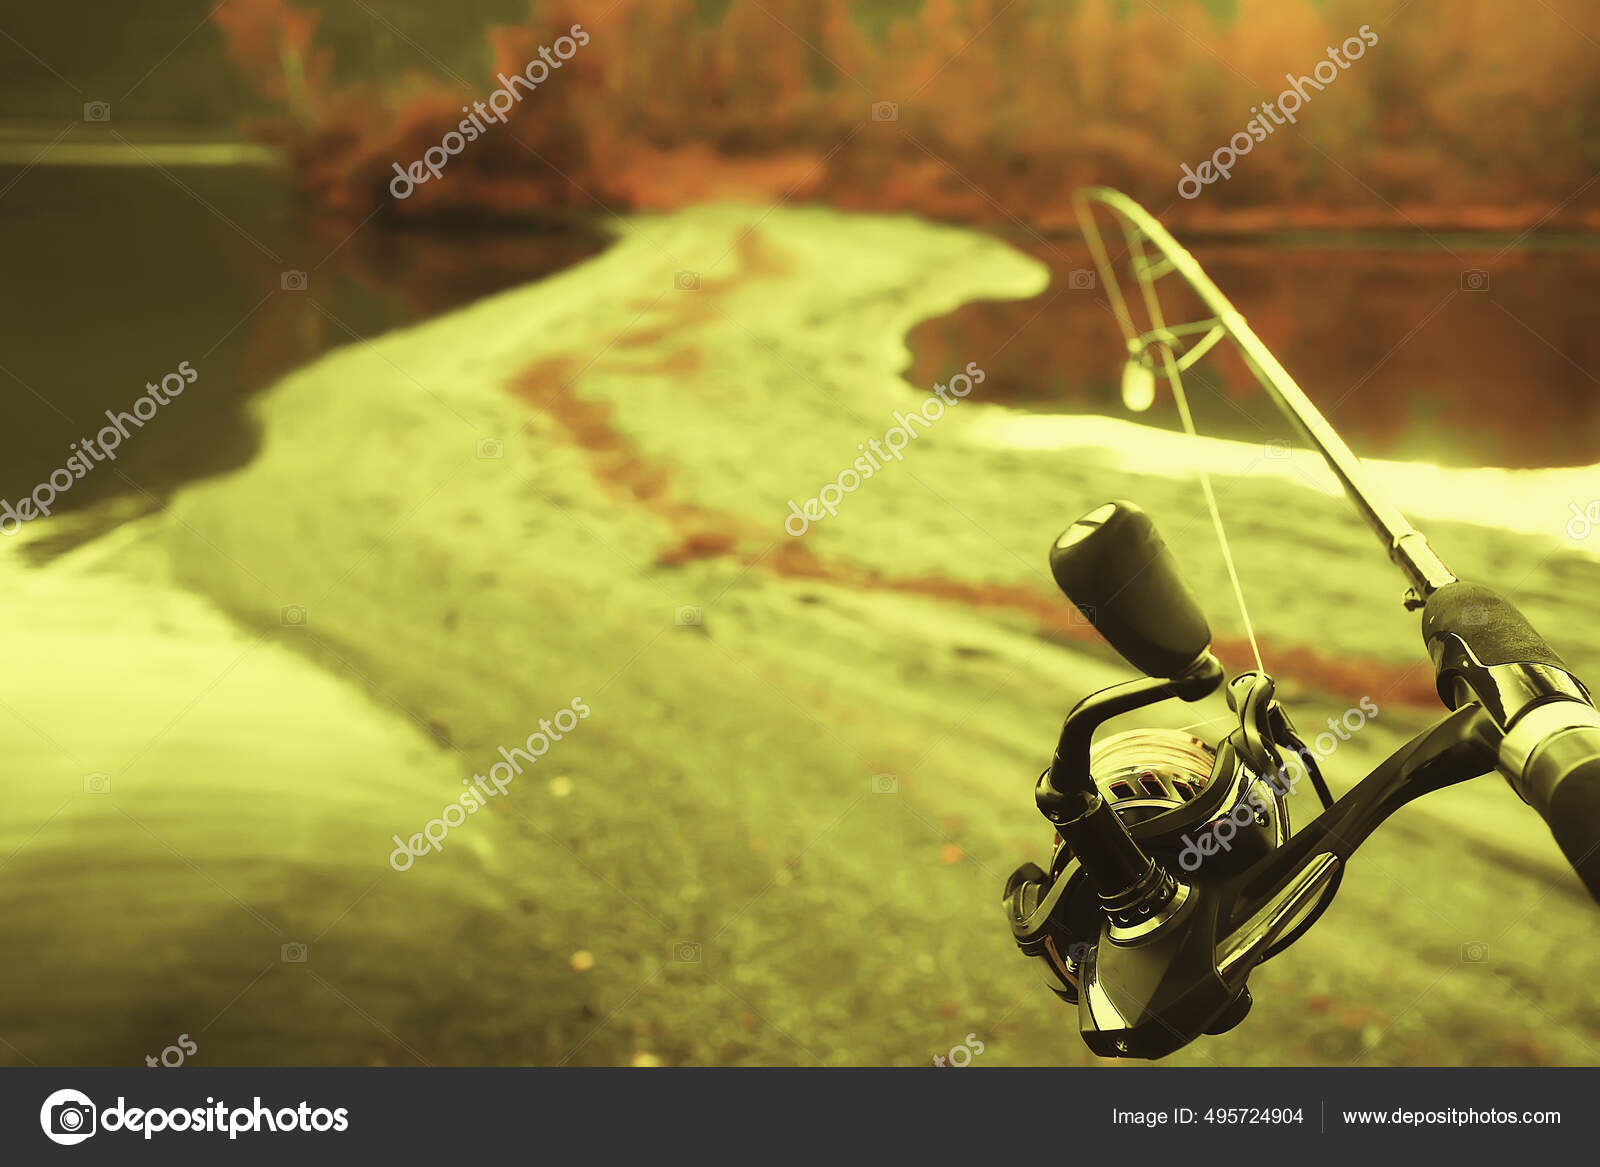 Spinning Reel Hand Fishing Nature Abstract Background Hobby